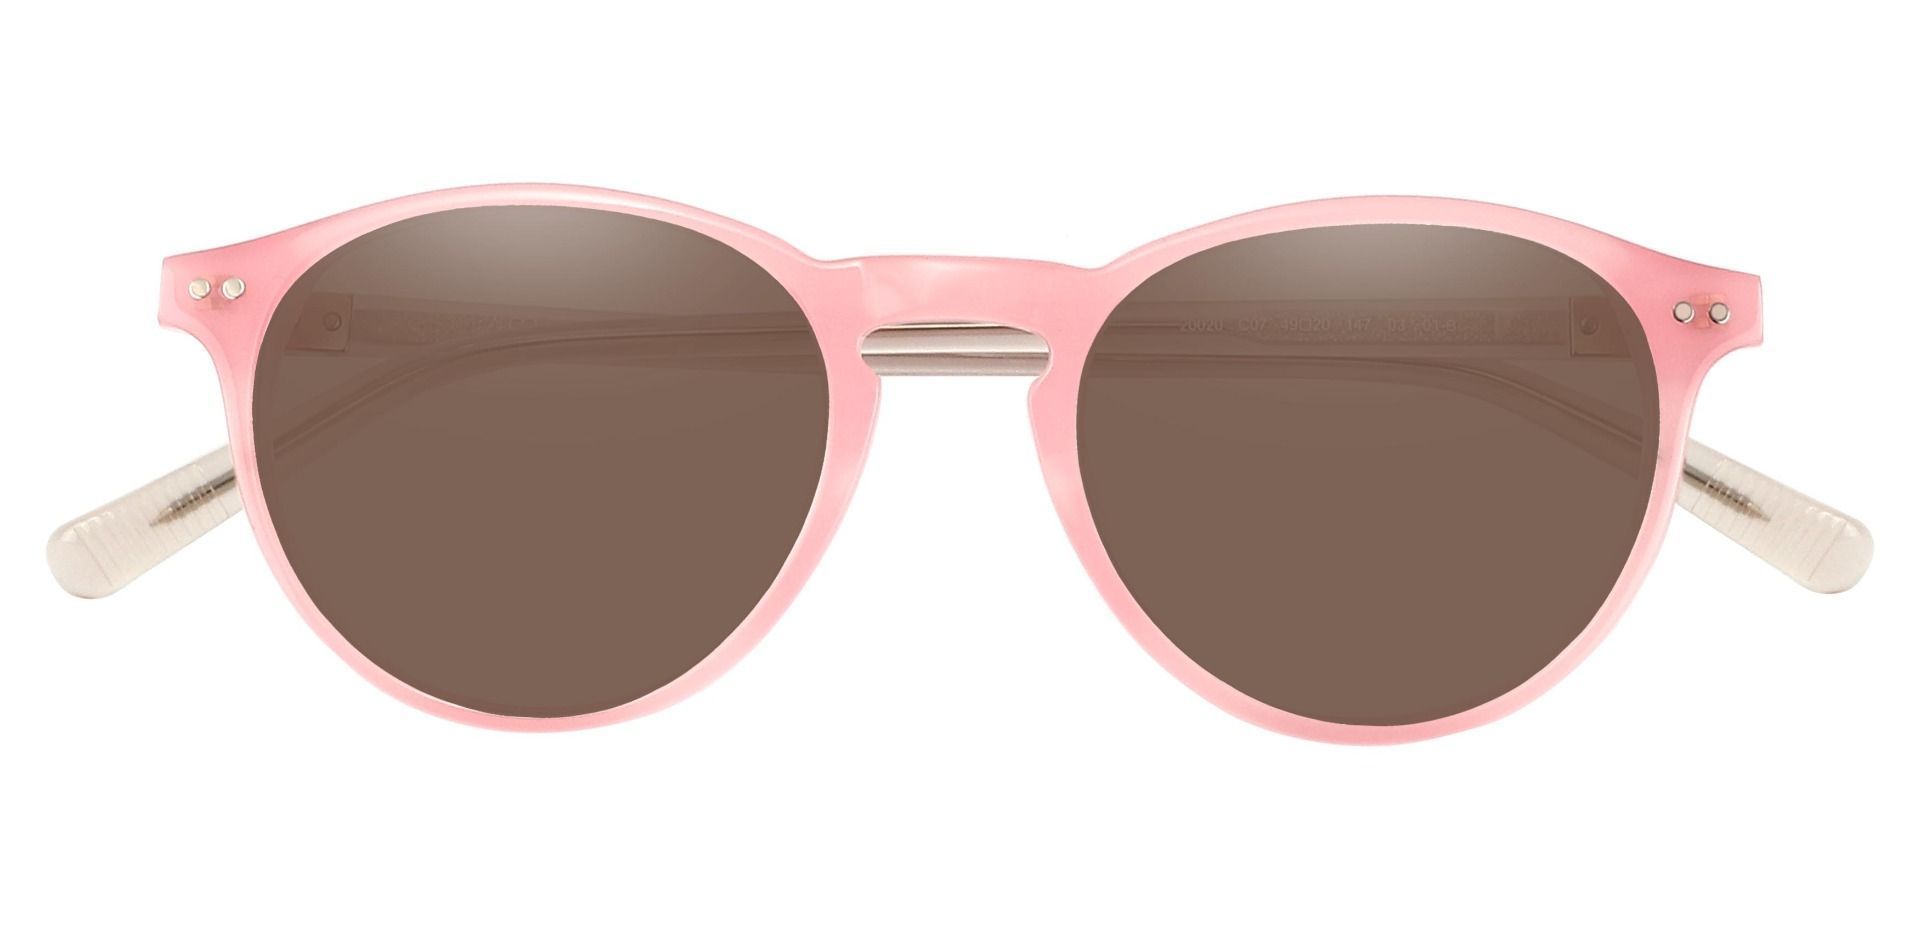 Monarch Oval Progressive Sunglasses - Pink Frame With Brown Lenses